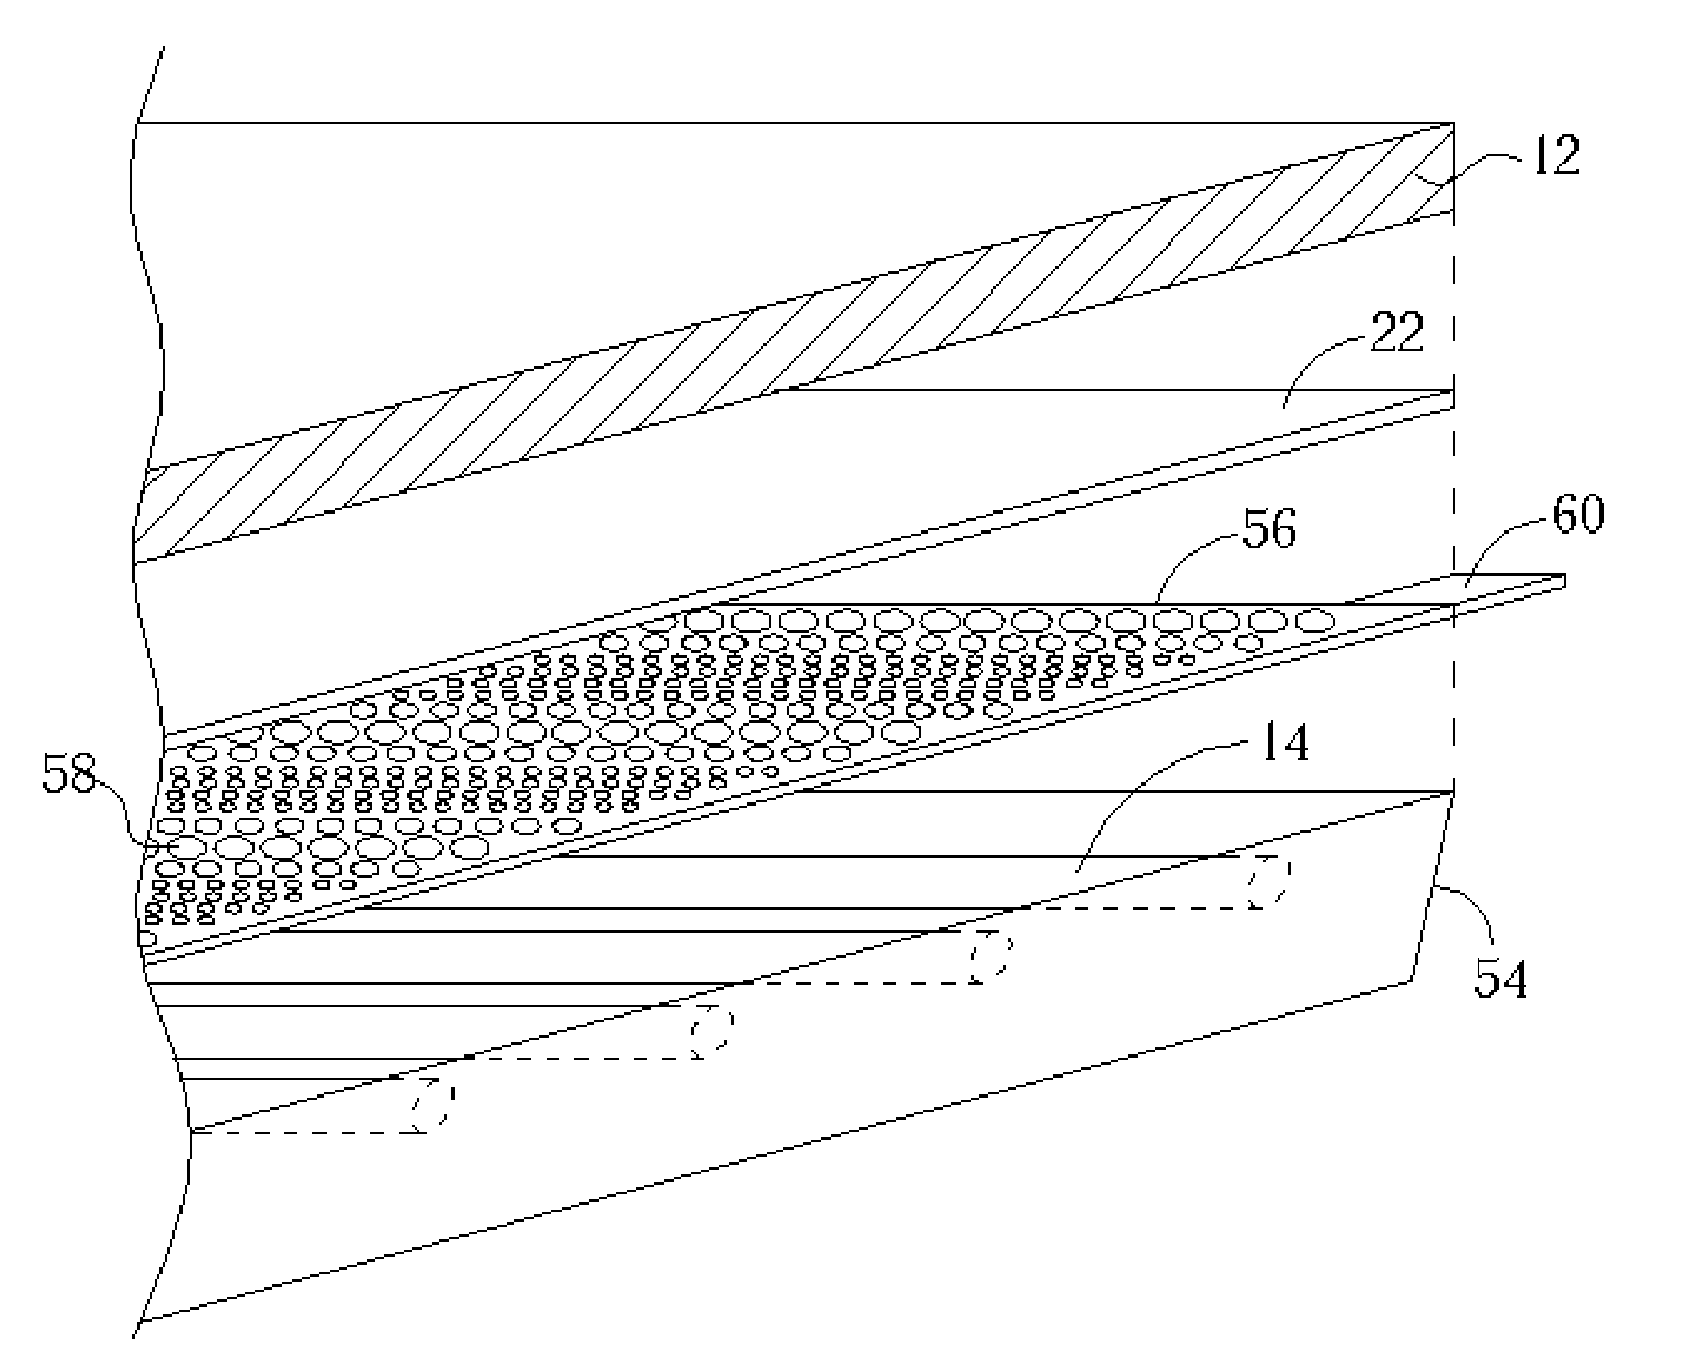 Direct-type backlight unit with diffusion film for flat panel liquid crystal display